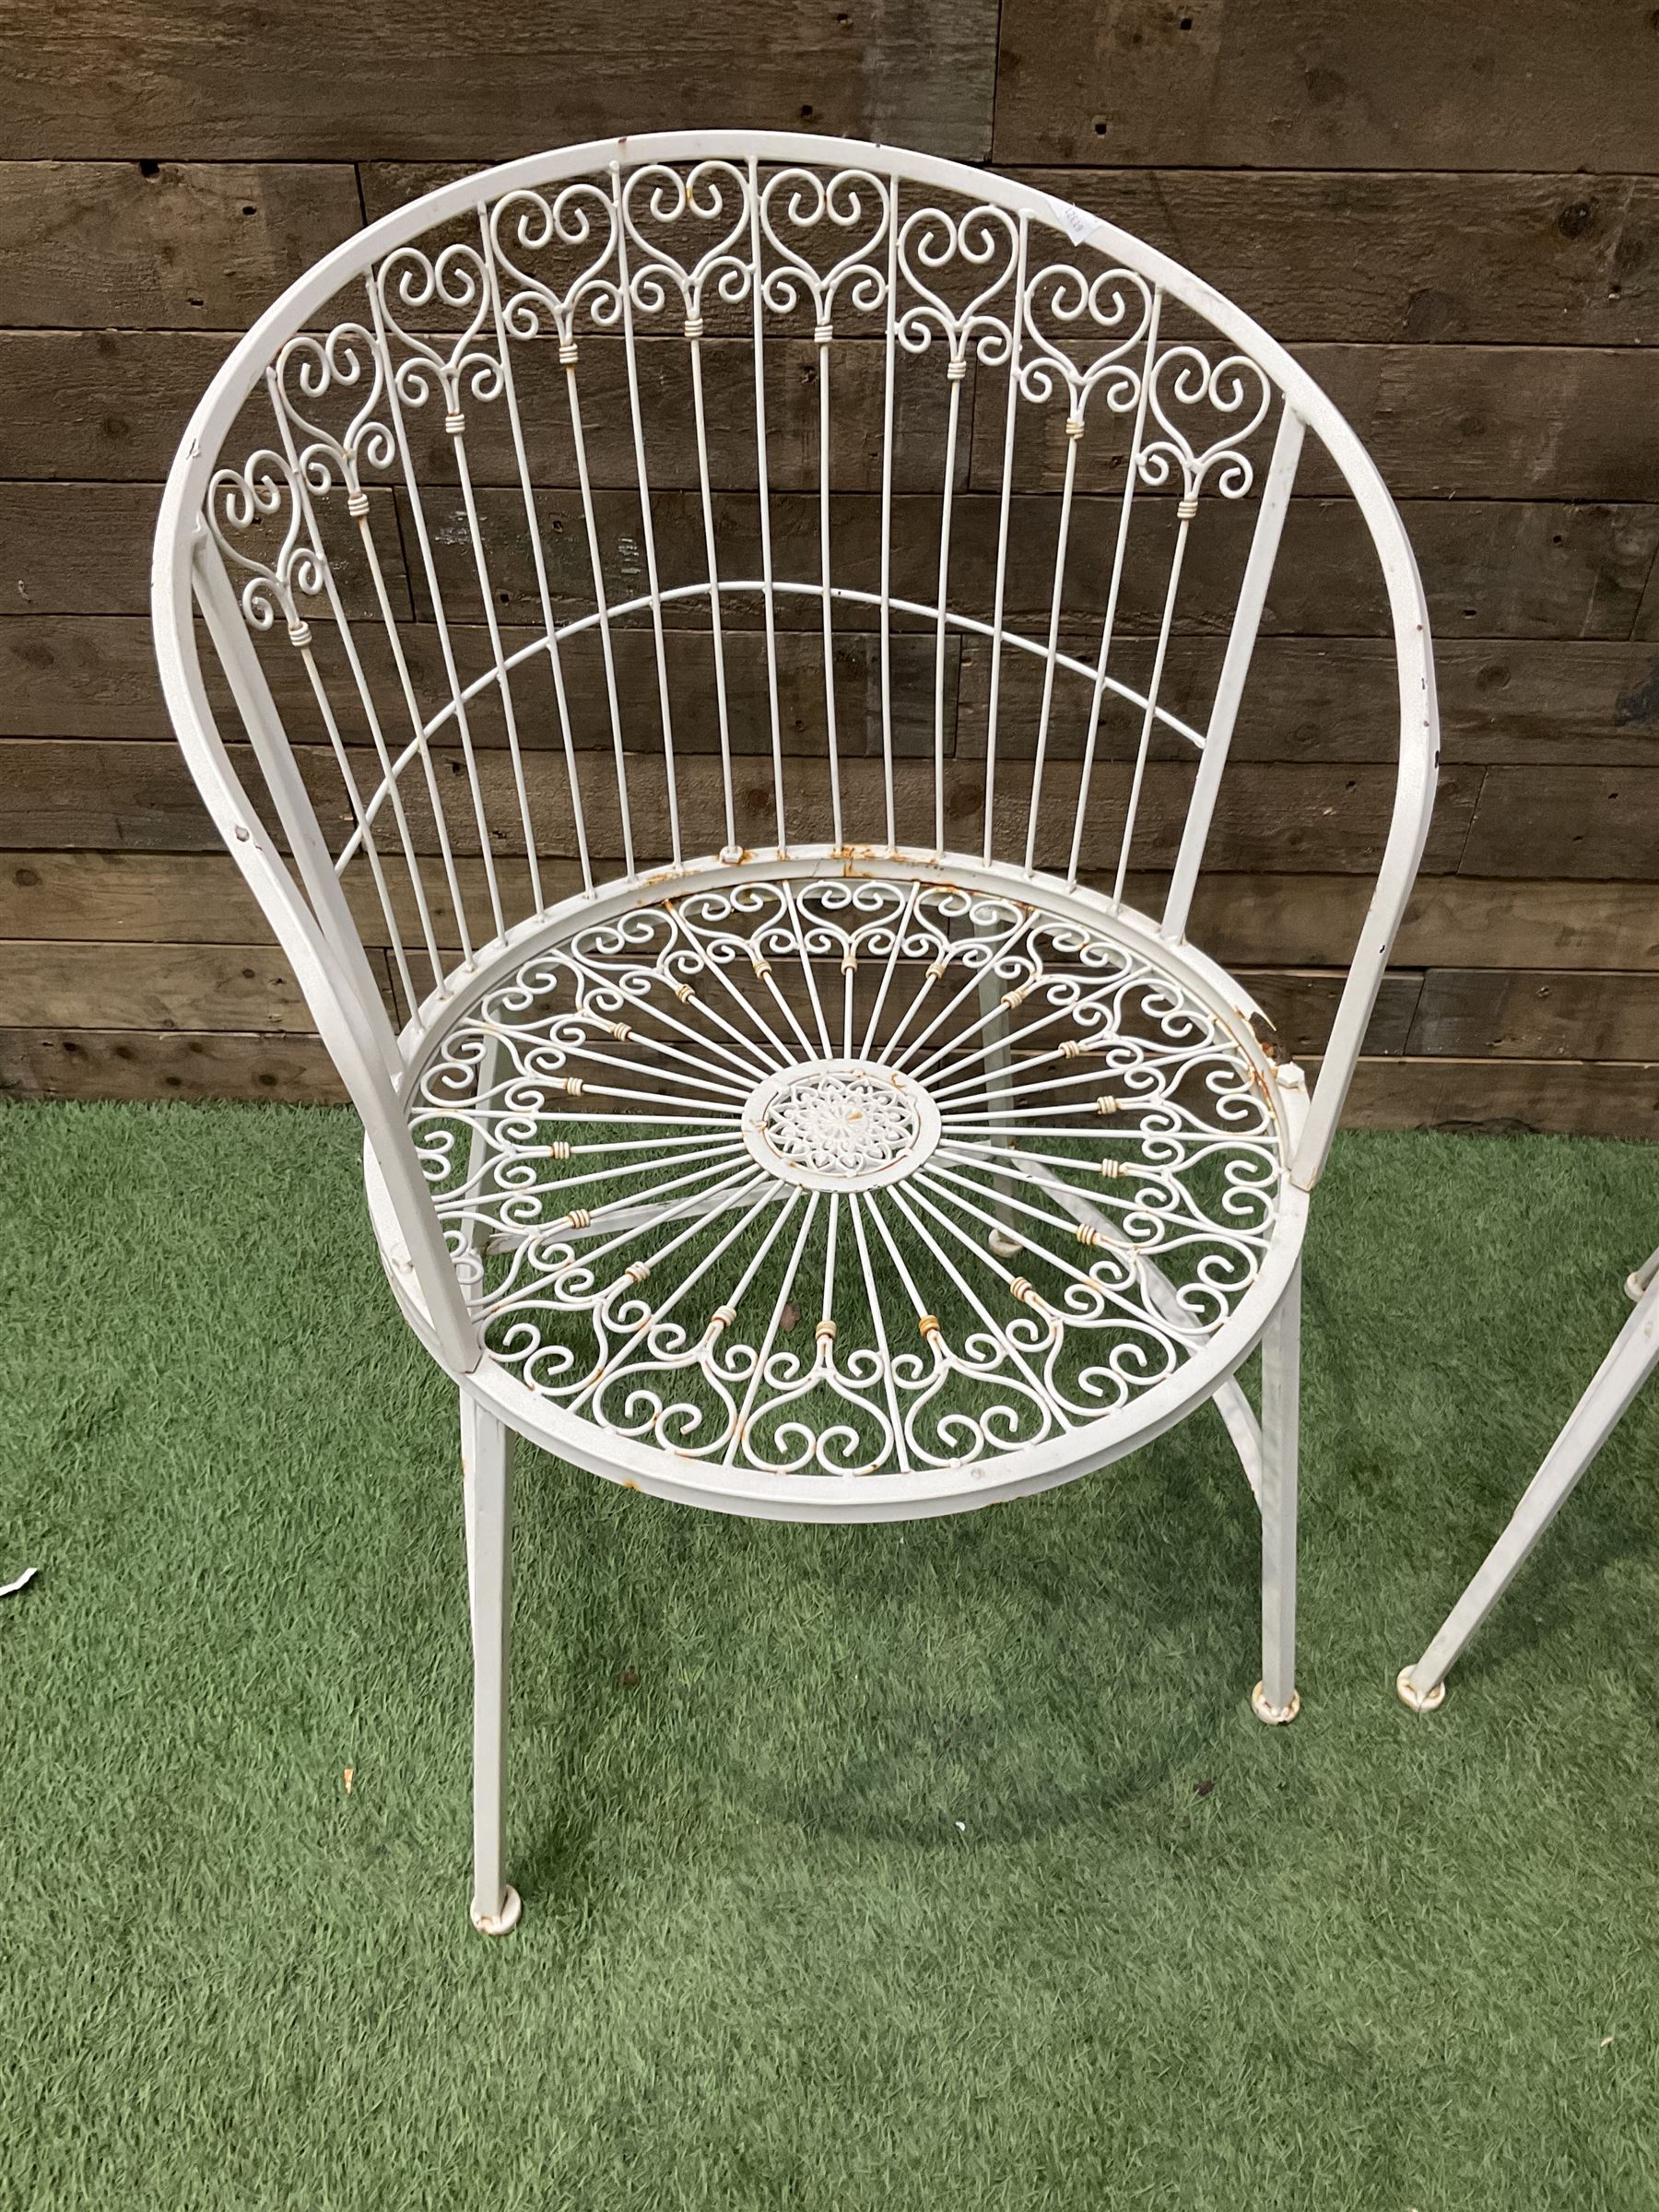 Pair of wrought metal white painted wirework garden chairs - Image 3 of 3